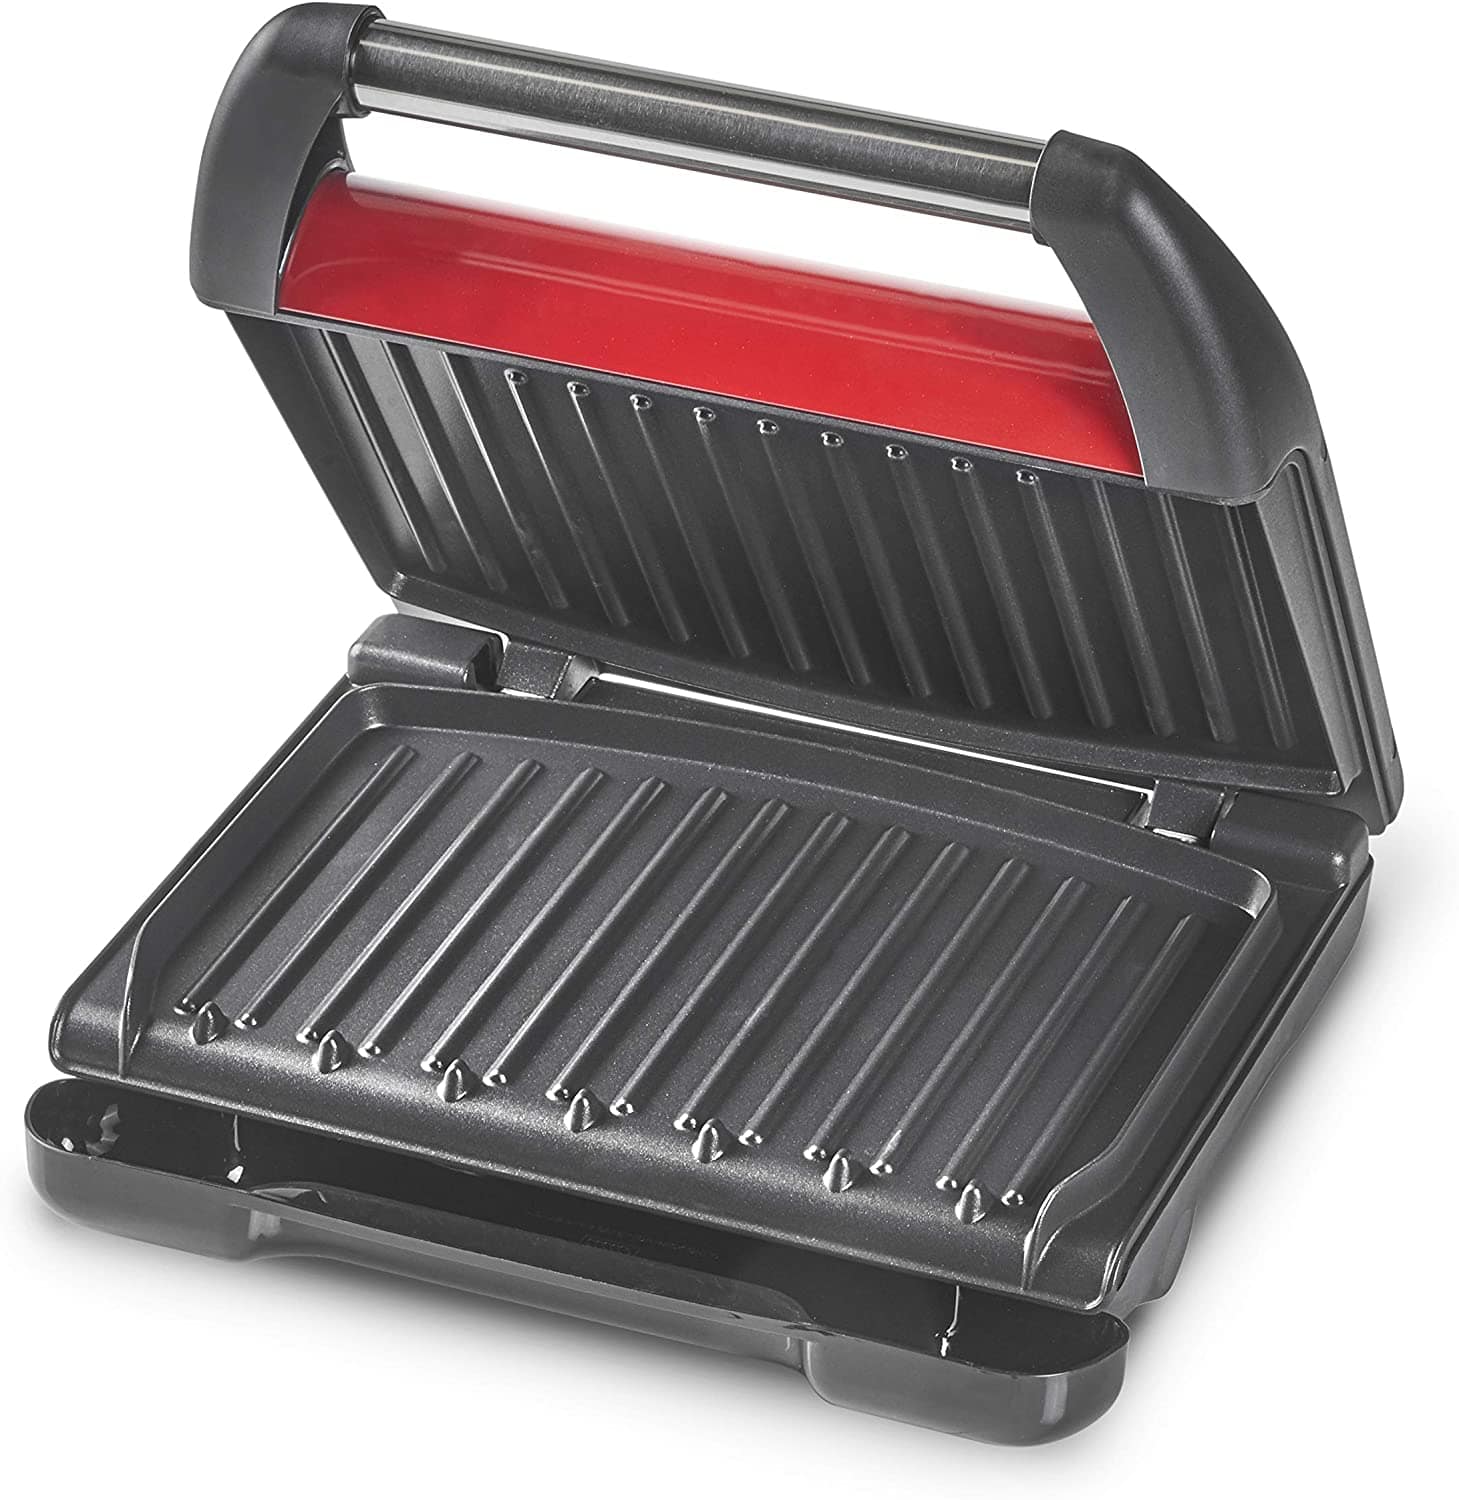 George Foreman Large Steel Grill Family, Red 1850W - 25050